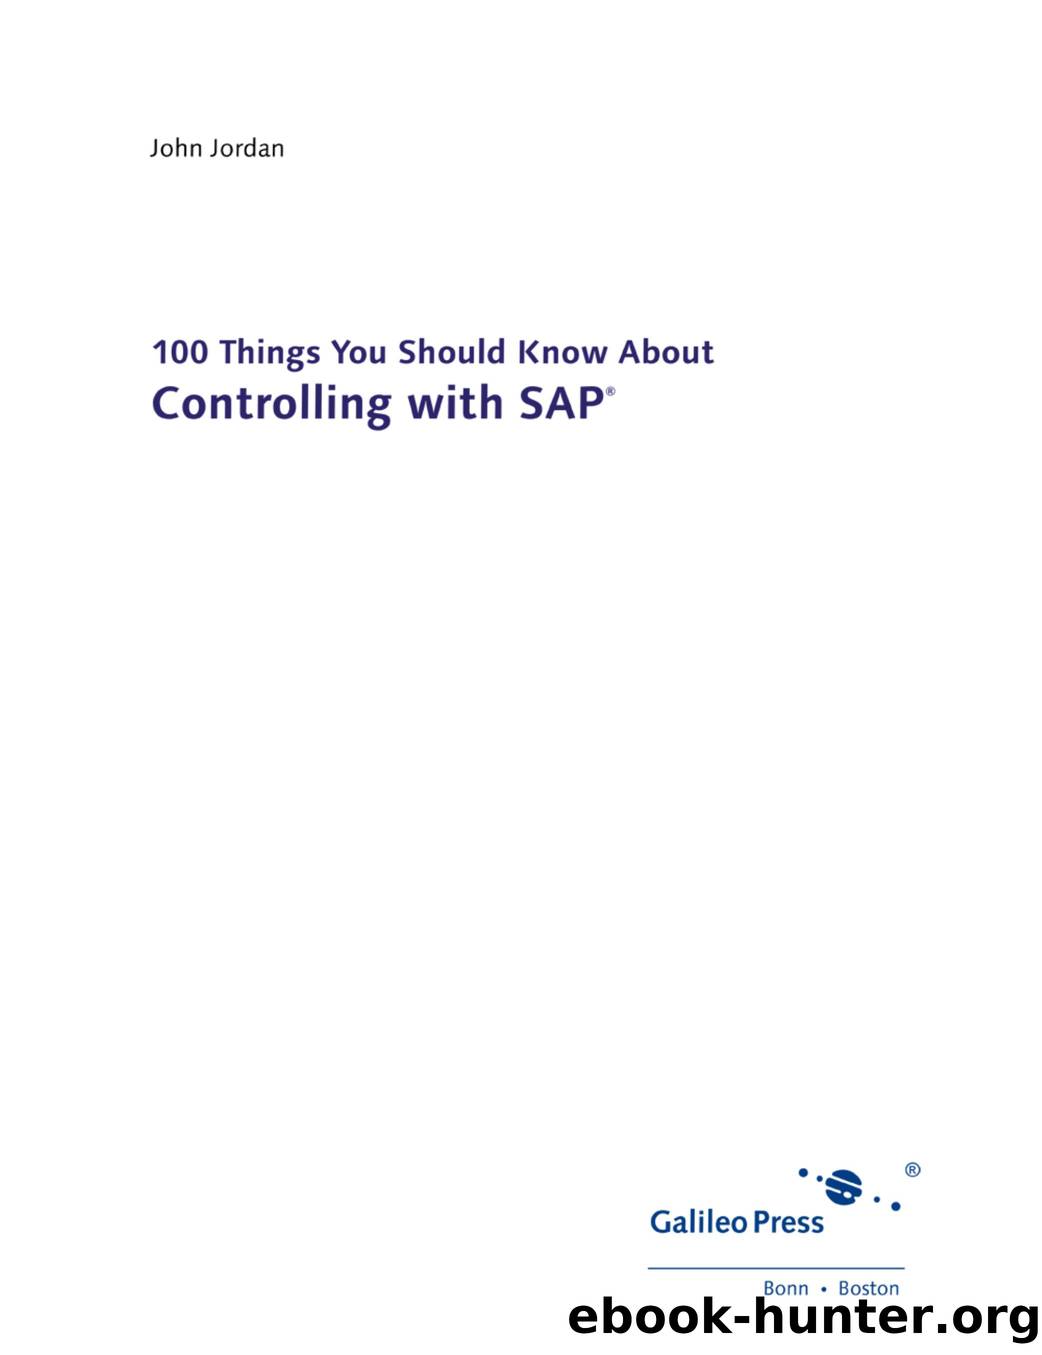 100 Things You Should Know About Controlling with SAP by Unknown